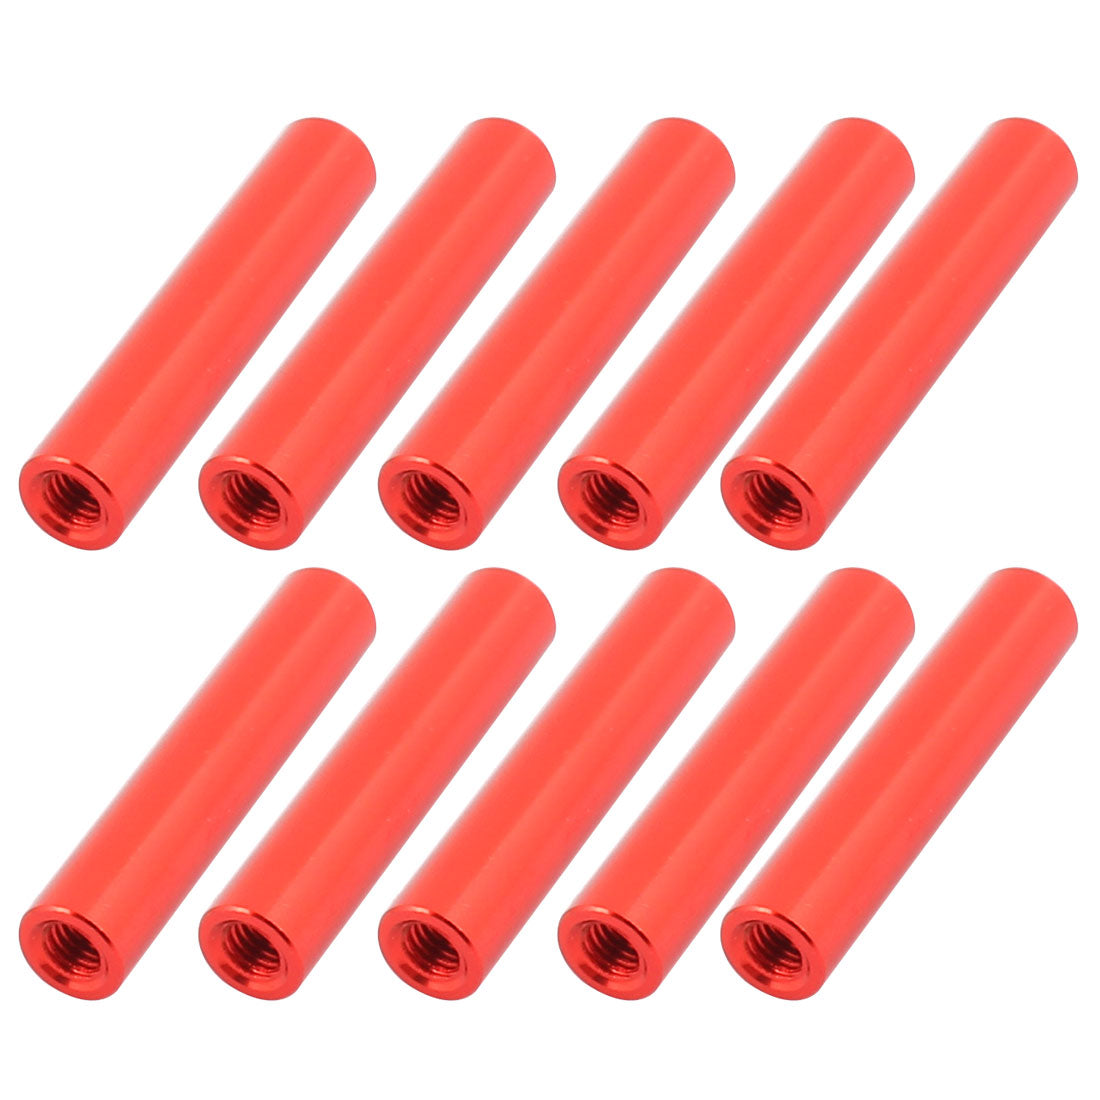 uxcell Uxcell 10 Pcs M3 x 25mm Round Aluminum Column Alloy Standoff Spacer Stud Fastener for Quadcopter Red